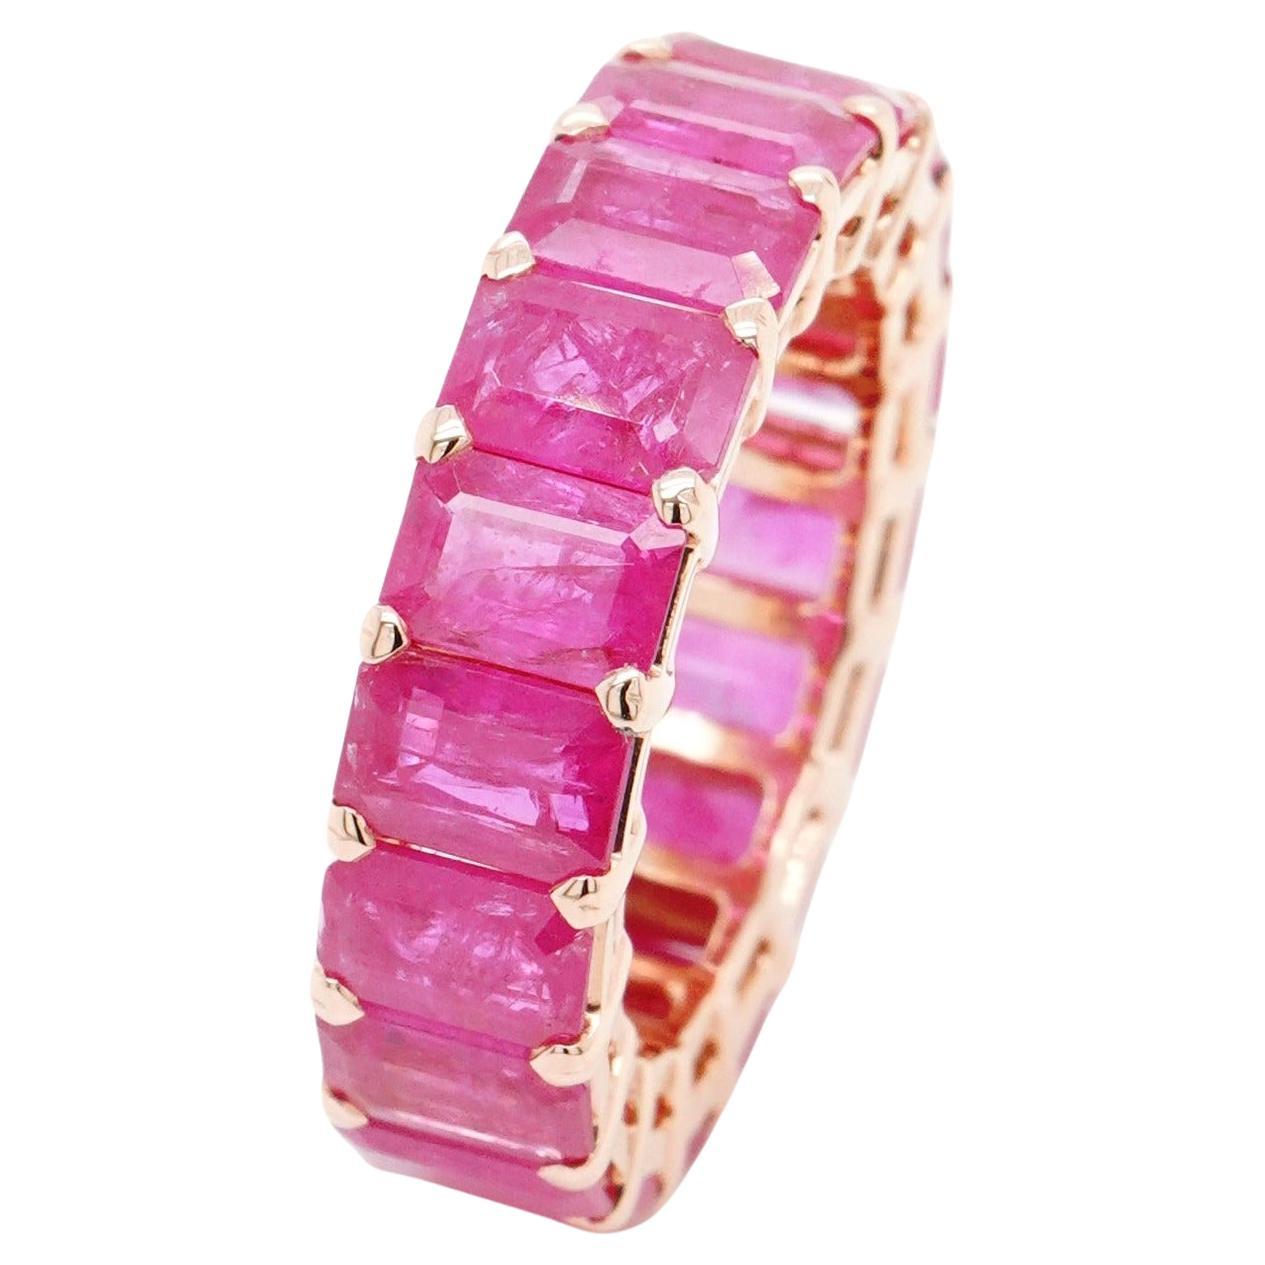 BENJAMIN FINE JEWELRY 12.38 cts Burmese Octagon Ruby 18K Eternity Band Ring For Sale